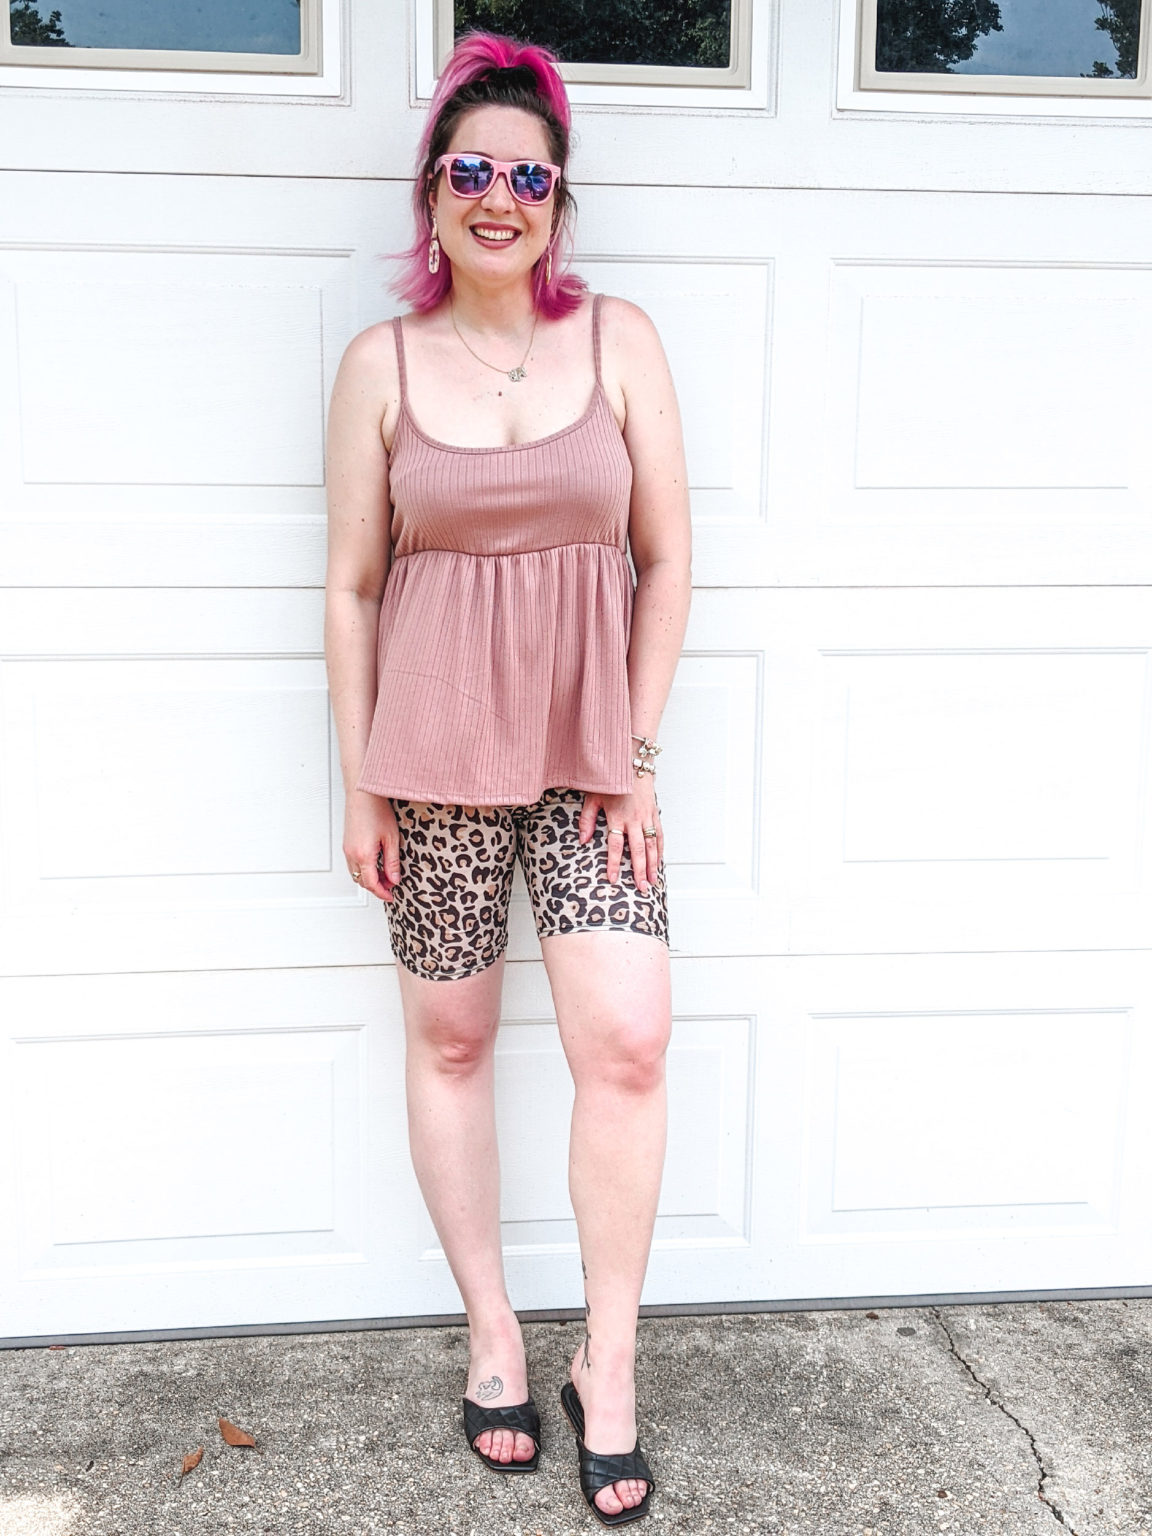 A Very Comfy Summer Outfit & a Linkup - Jersey Girl, Texan Heart